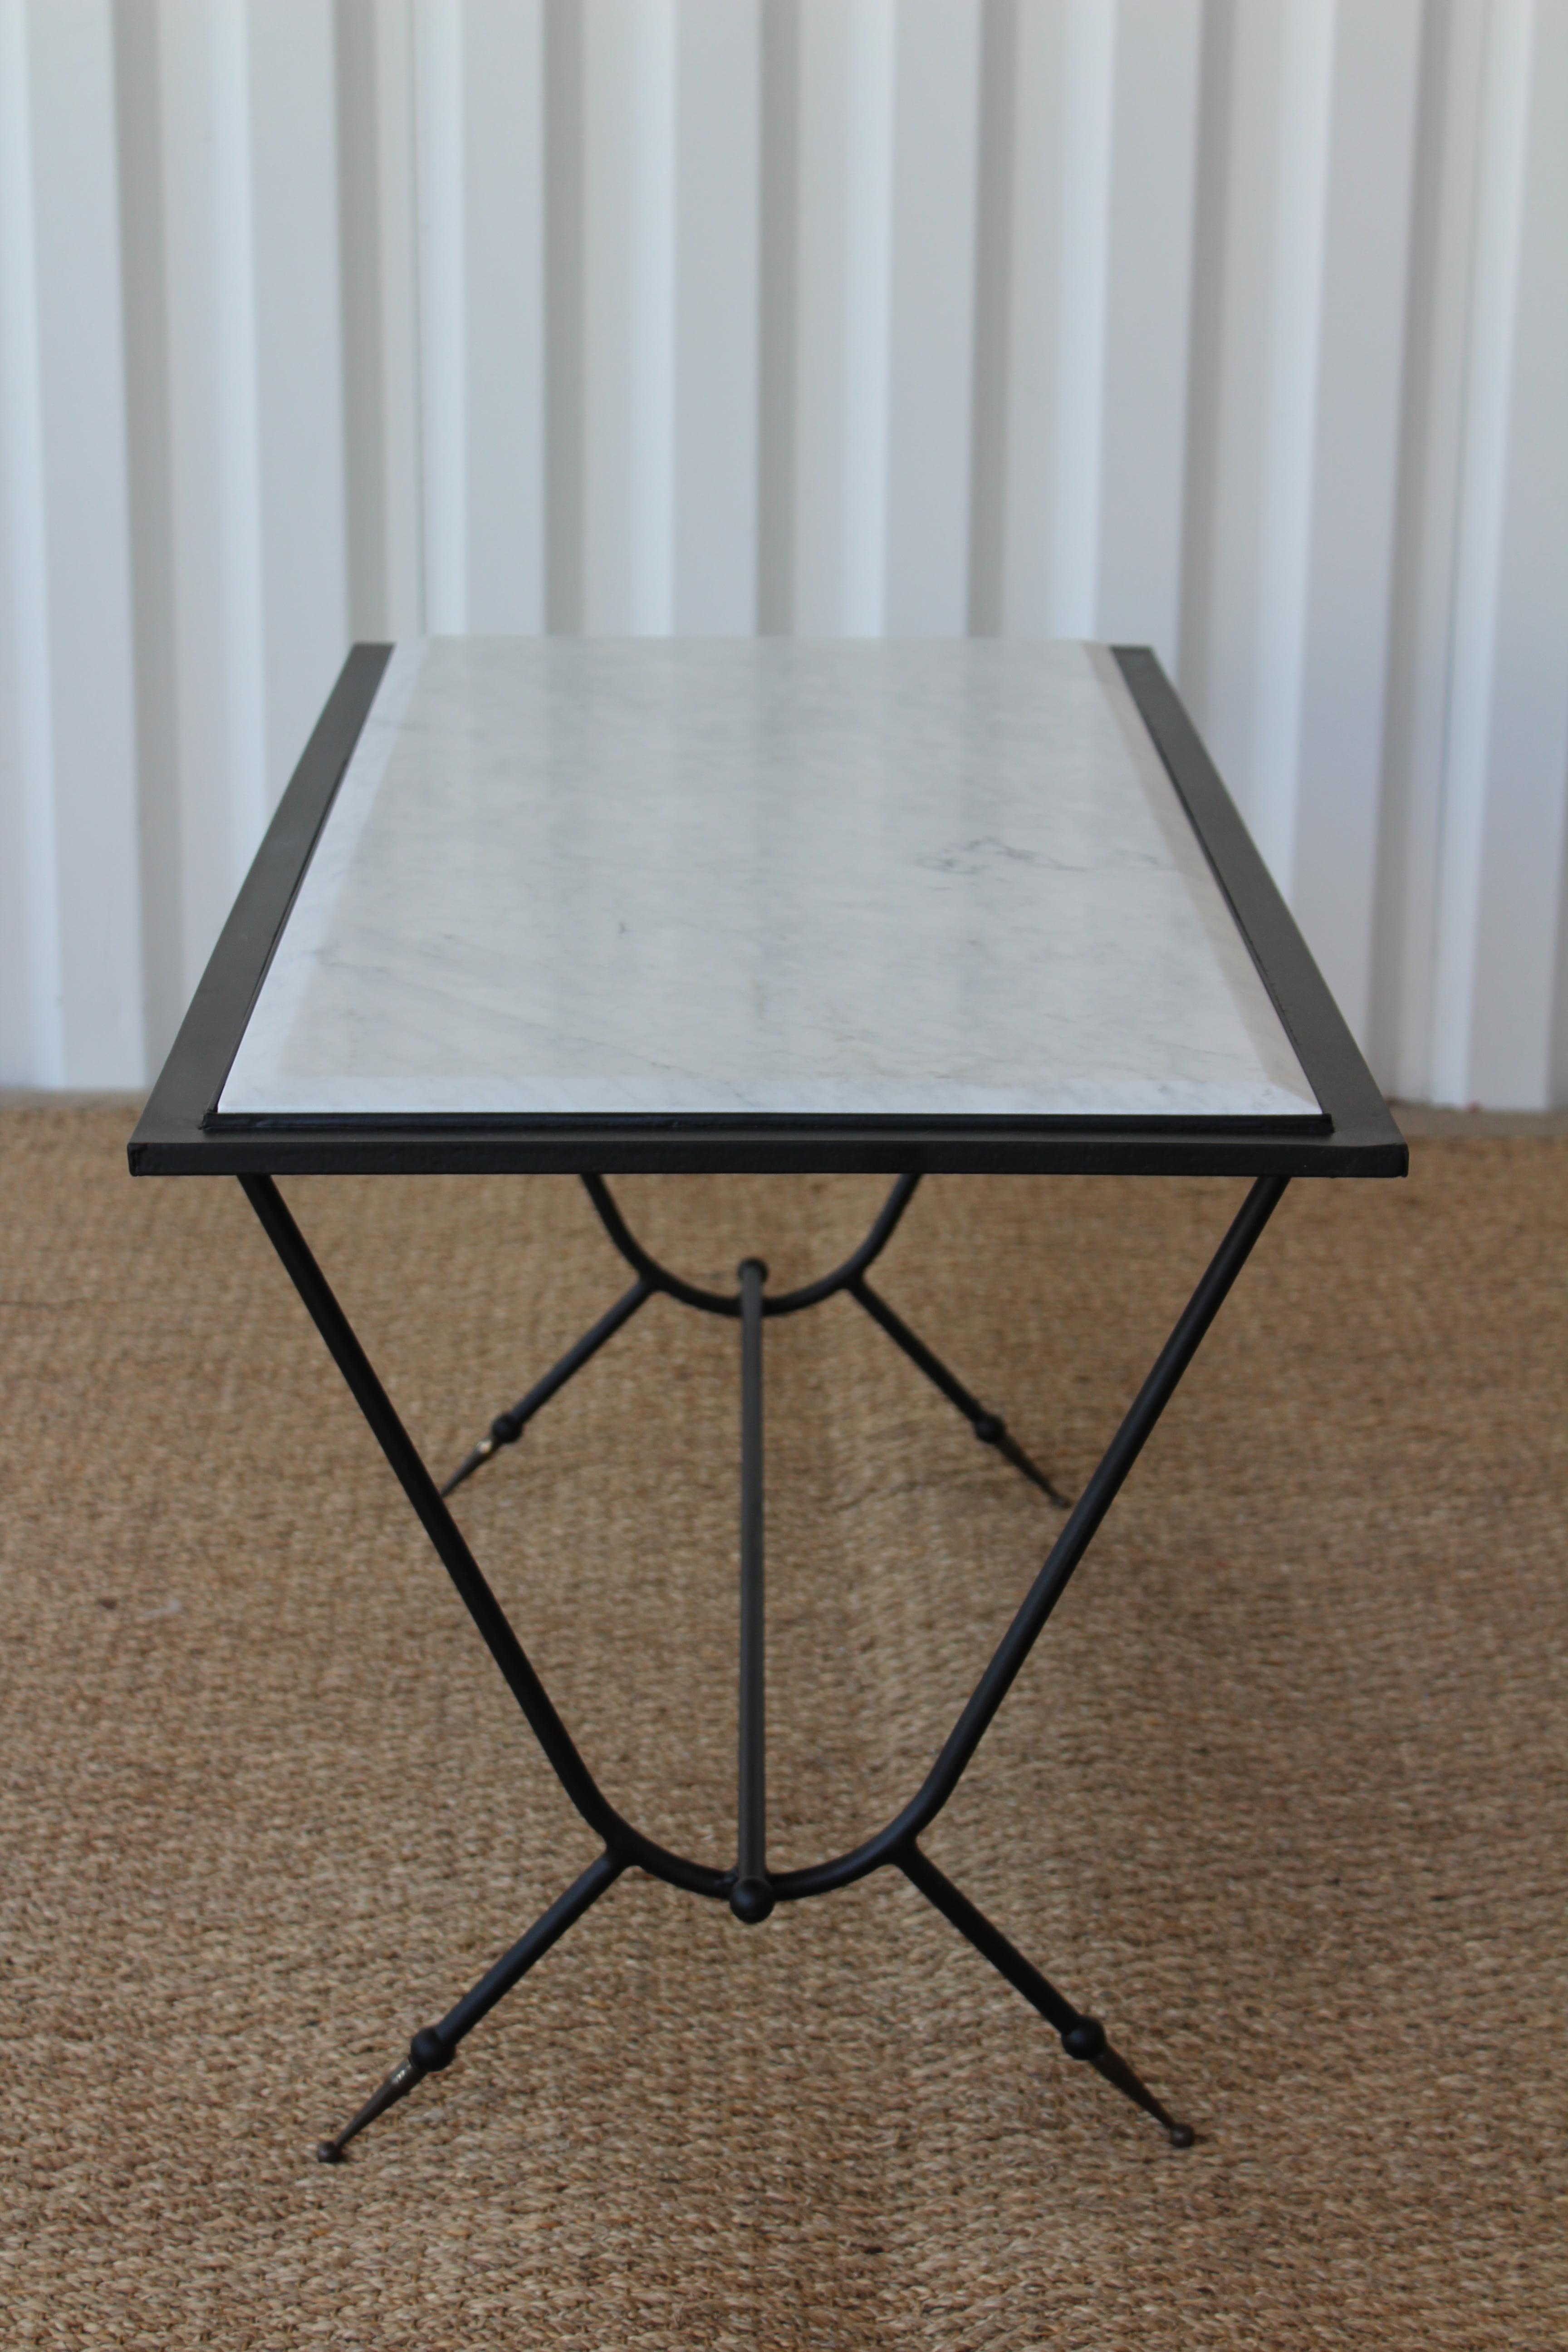 Vintage 1950s Italian coffee table, made of iron and marble, with solid brass sabot feet. The table has been restored with a newly powdercoated iron frame and a new marble surface. The brass sabot feet have been left with a nicely aged brass patina.